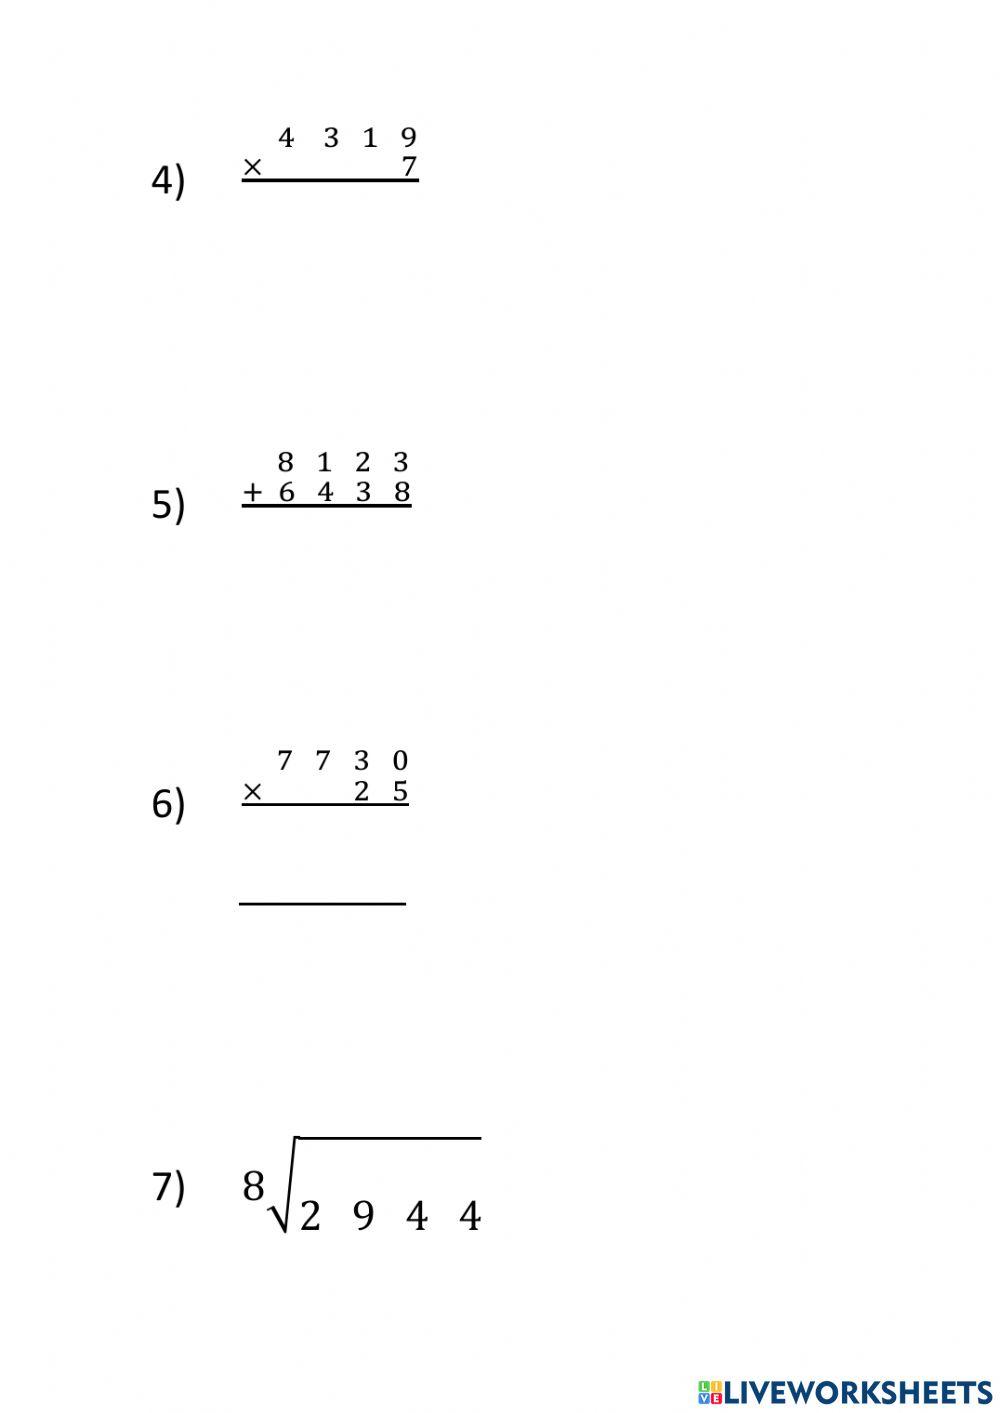 Operations on Whole Numbers 2